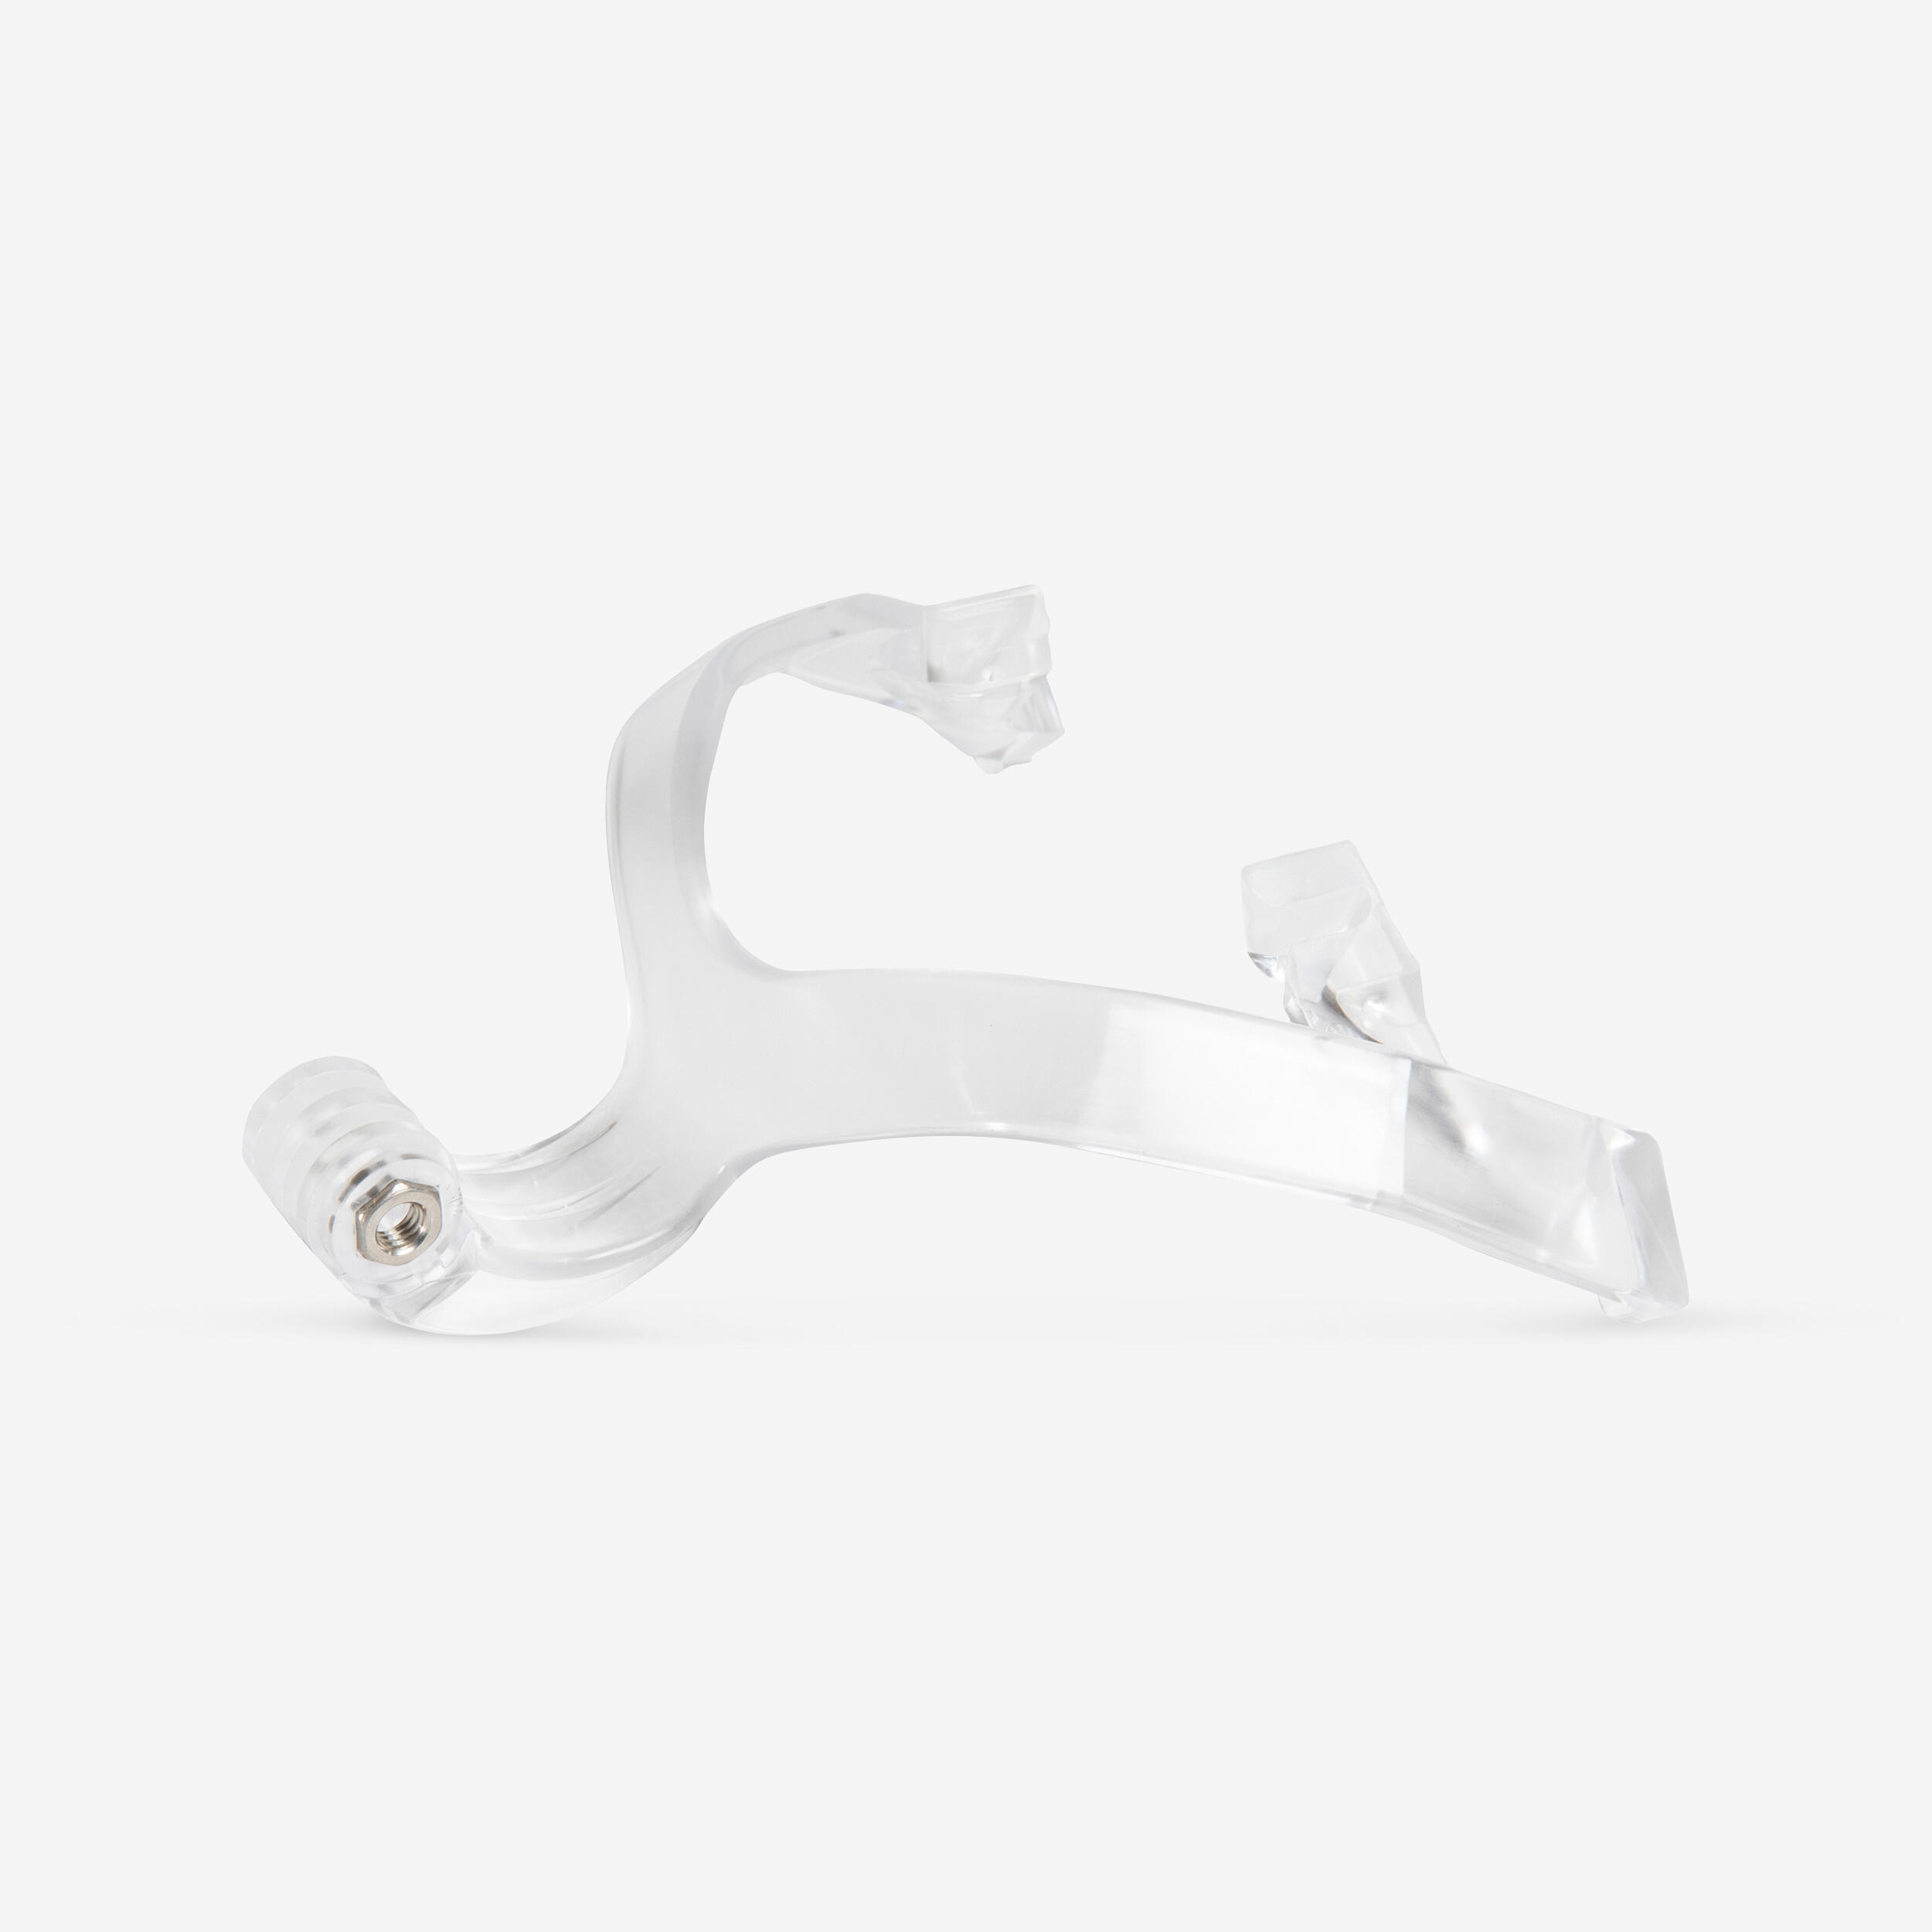 SUBEA Camera mount for the Easybreath Snorkelling mask